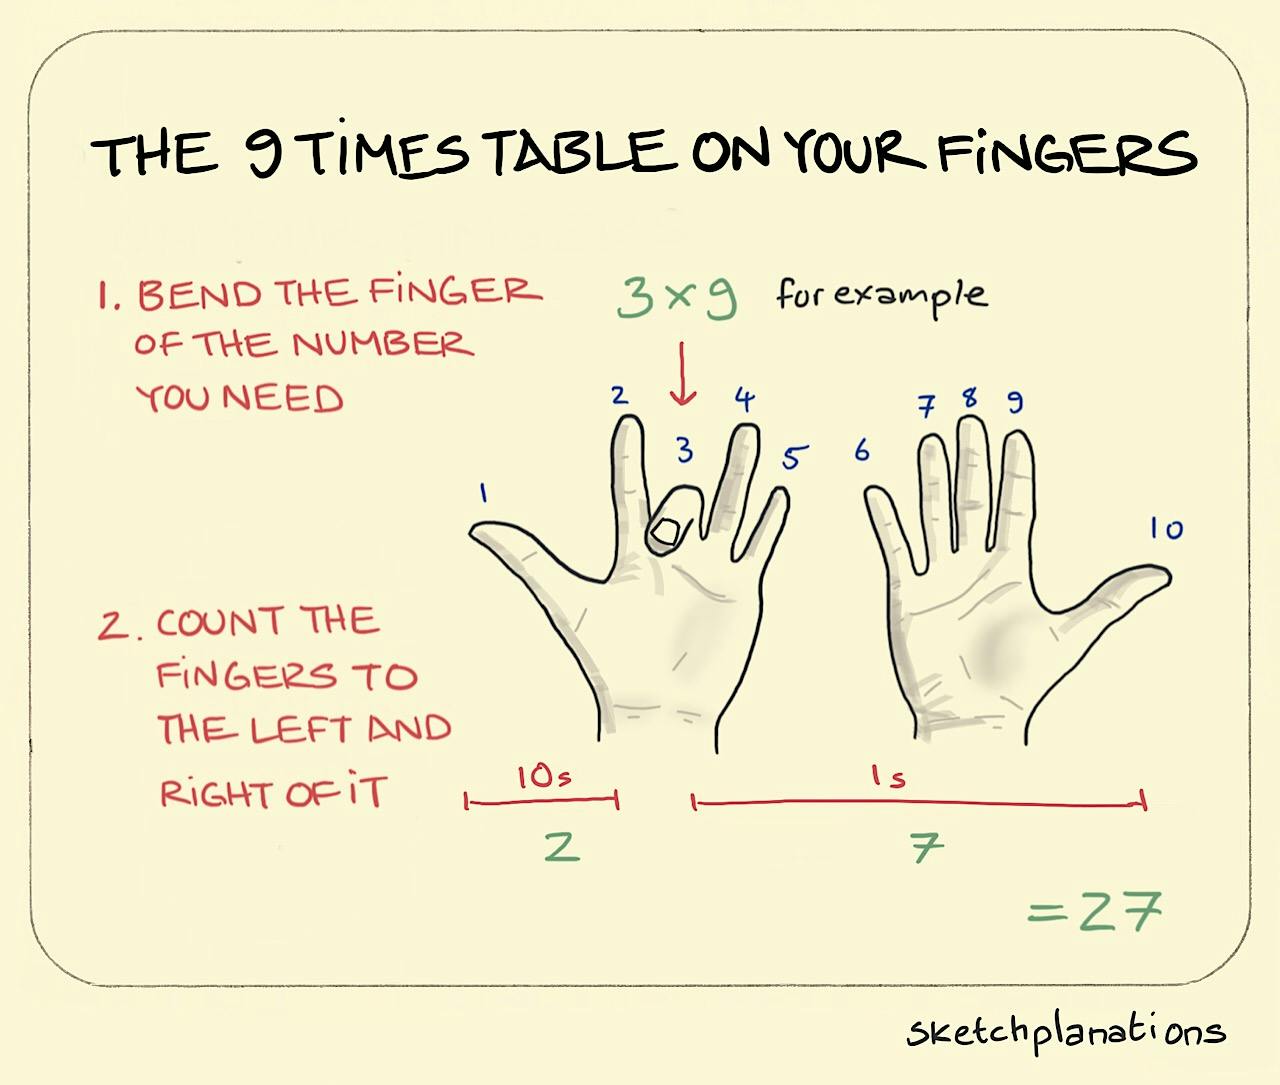 The 9-times table on your Fingers illustration: holding up both hands in front of you, the example of 3 x 9 is given; whereby the 3rd finger from the left is lowered leaving 2 fingers to the left of the gap and 7 fingers to the right. 2 and 7 gives 27. 